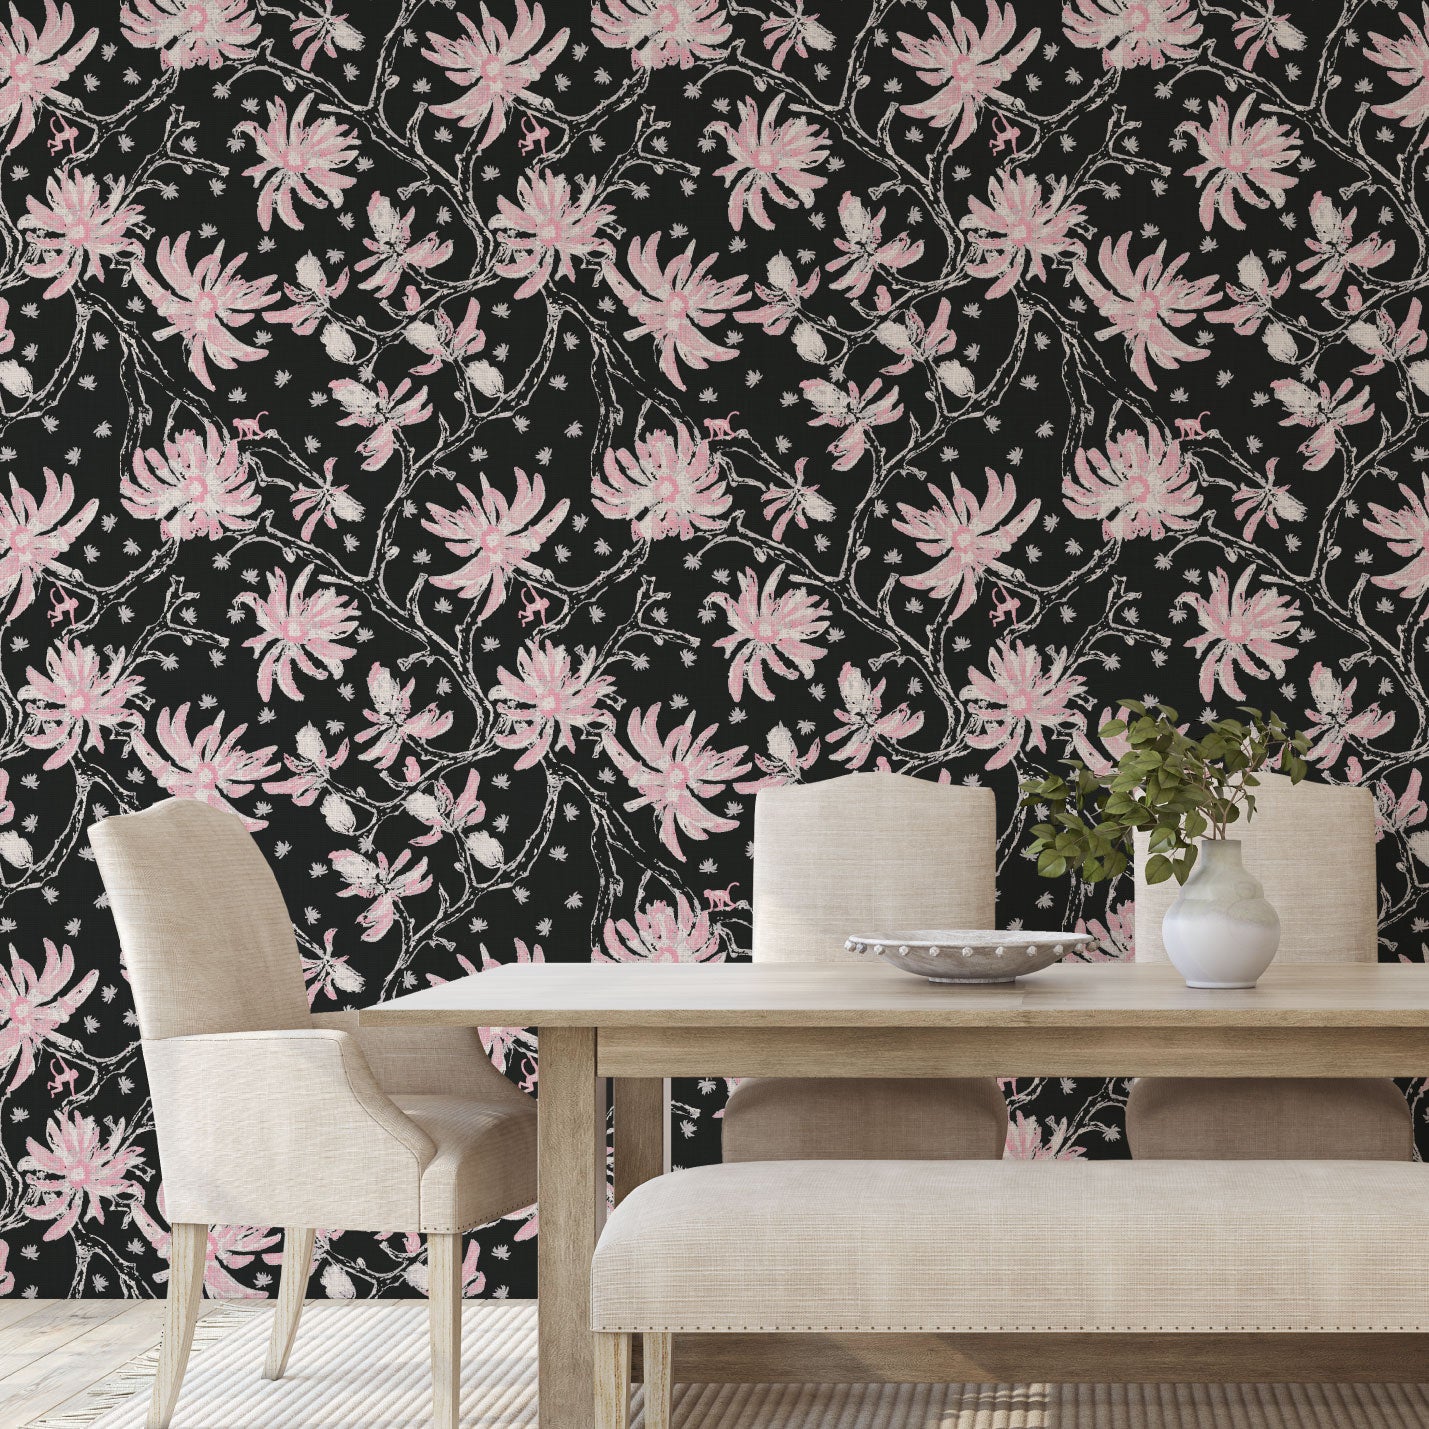 black pink pale pink pink flowers Natural Textured Eco-Friendly Non-toxic High-quality Sustainable practices Sustainability Wall covering Wallcovering Wallpaper Luxury Contemporary Designer Custom interior Bespoke Tailor-made Nature inspired Bold Garden Wallpaper Chinoiserie Asian inspired chinz tree branches flowers flower floral garden monkey animal chinese asian inspired linen